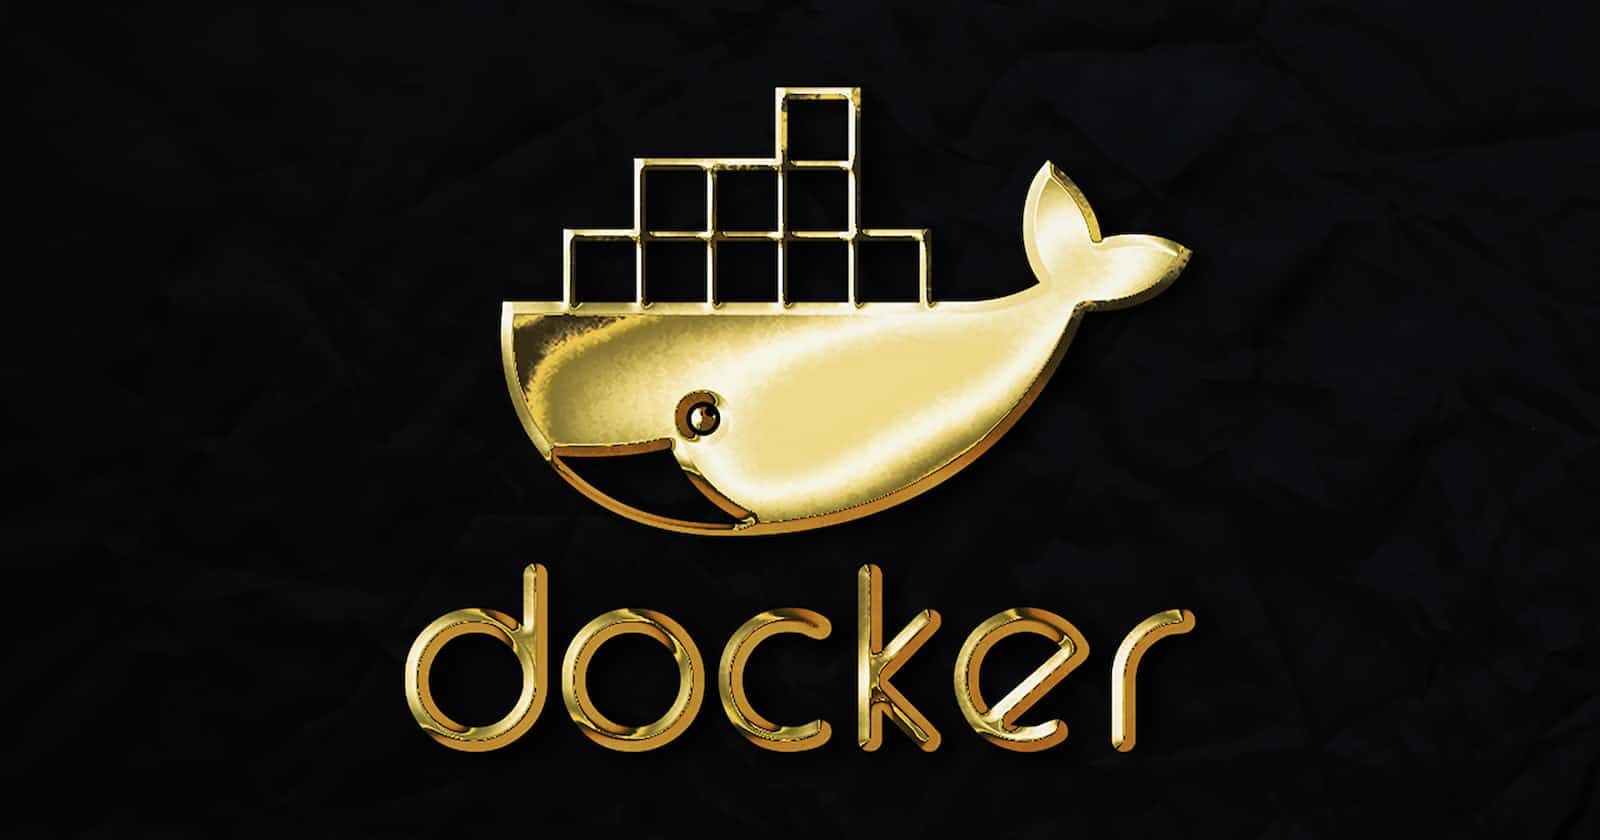 Things you need to Know before learning Docker